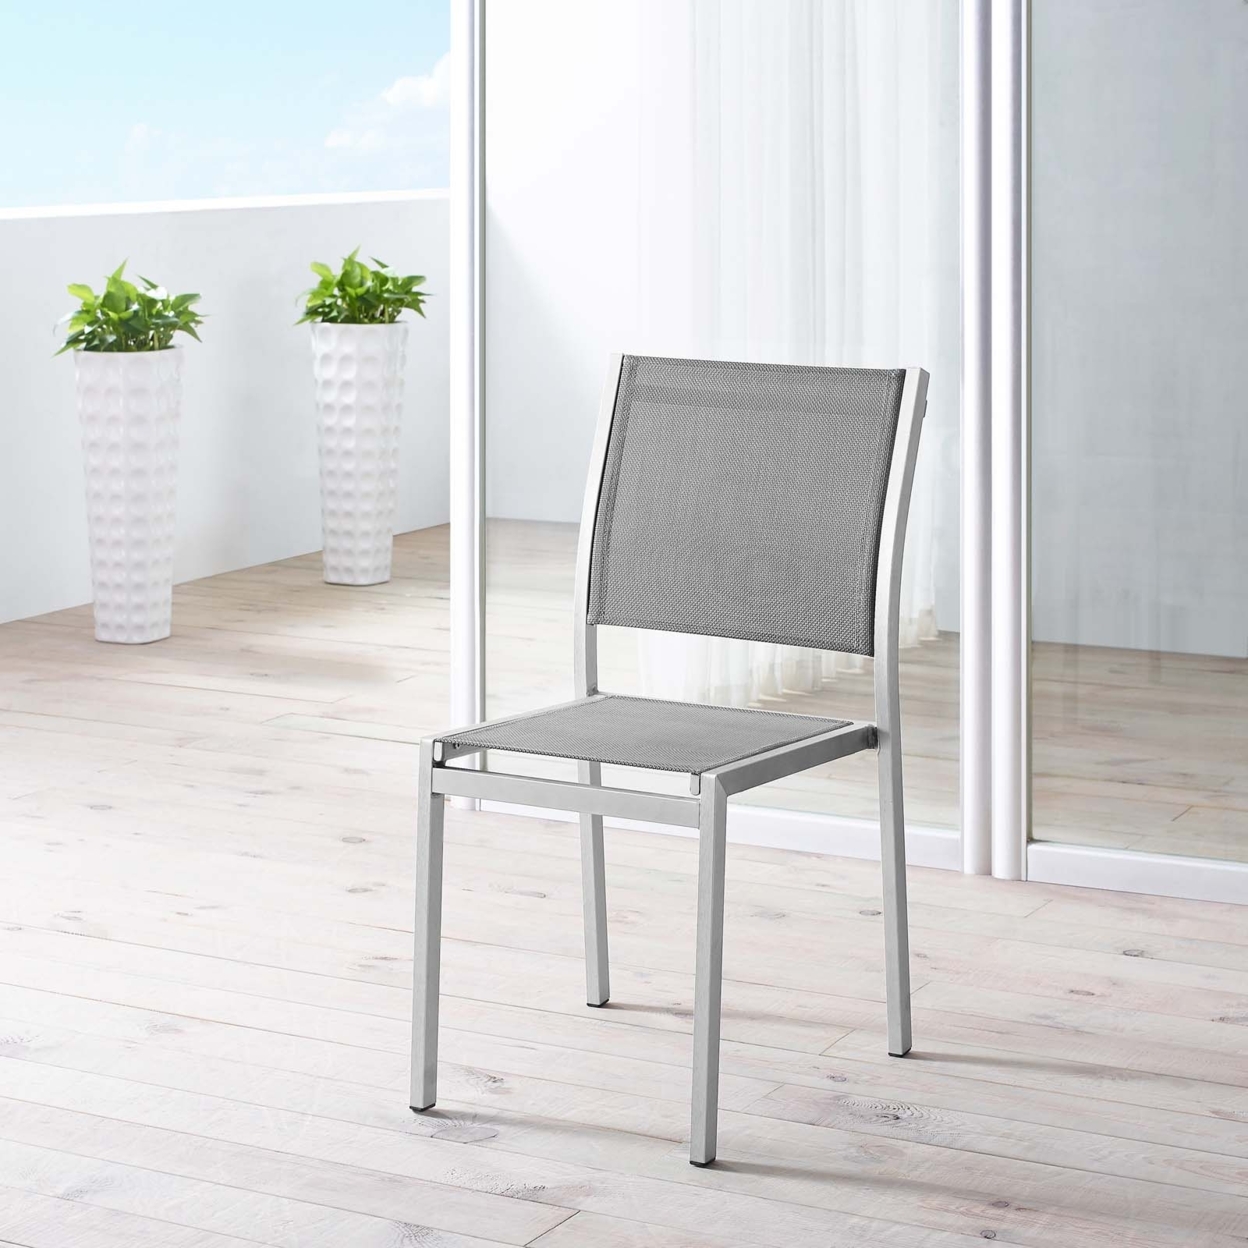 Modway Shore Fabric and Aluminum Outdoor Patio Dining Side Chair in Silver/Gray - image 4 of 4